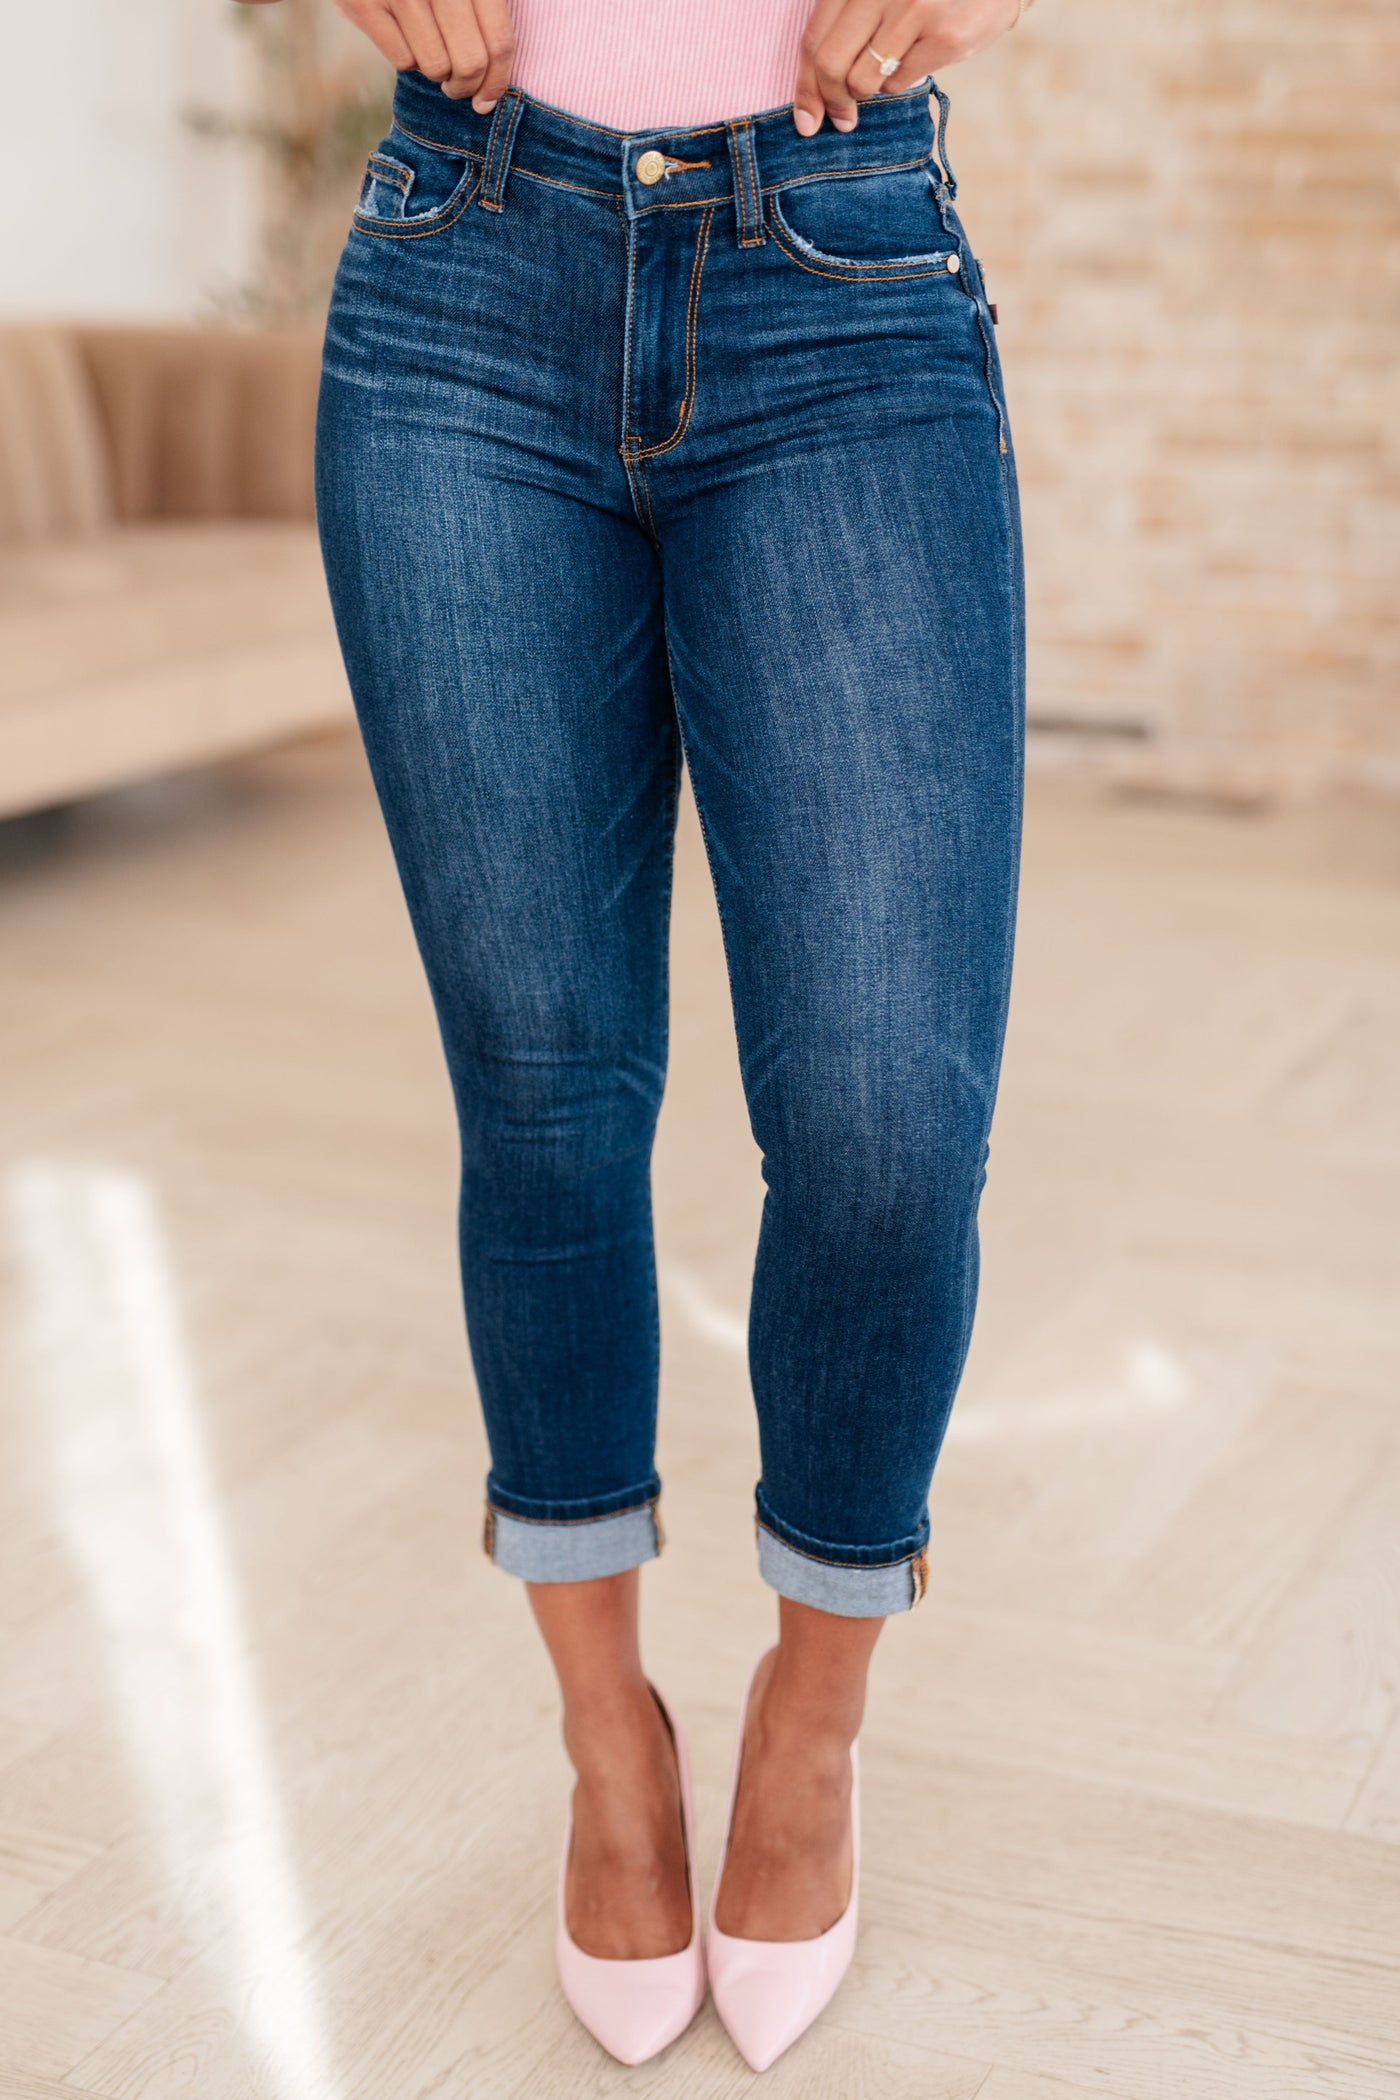 Bette Mid Rise Vintage Cuffed Skinny Capri-Denim-Ave Shops-Market Street Nest, Fashionable Clothing, Shoes and Home Décor Located in Mabank, TX